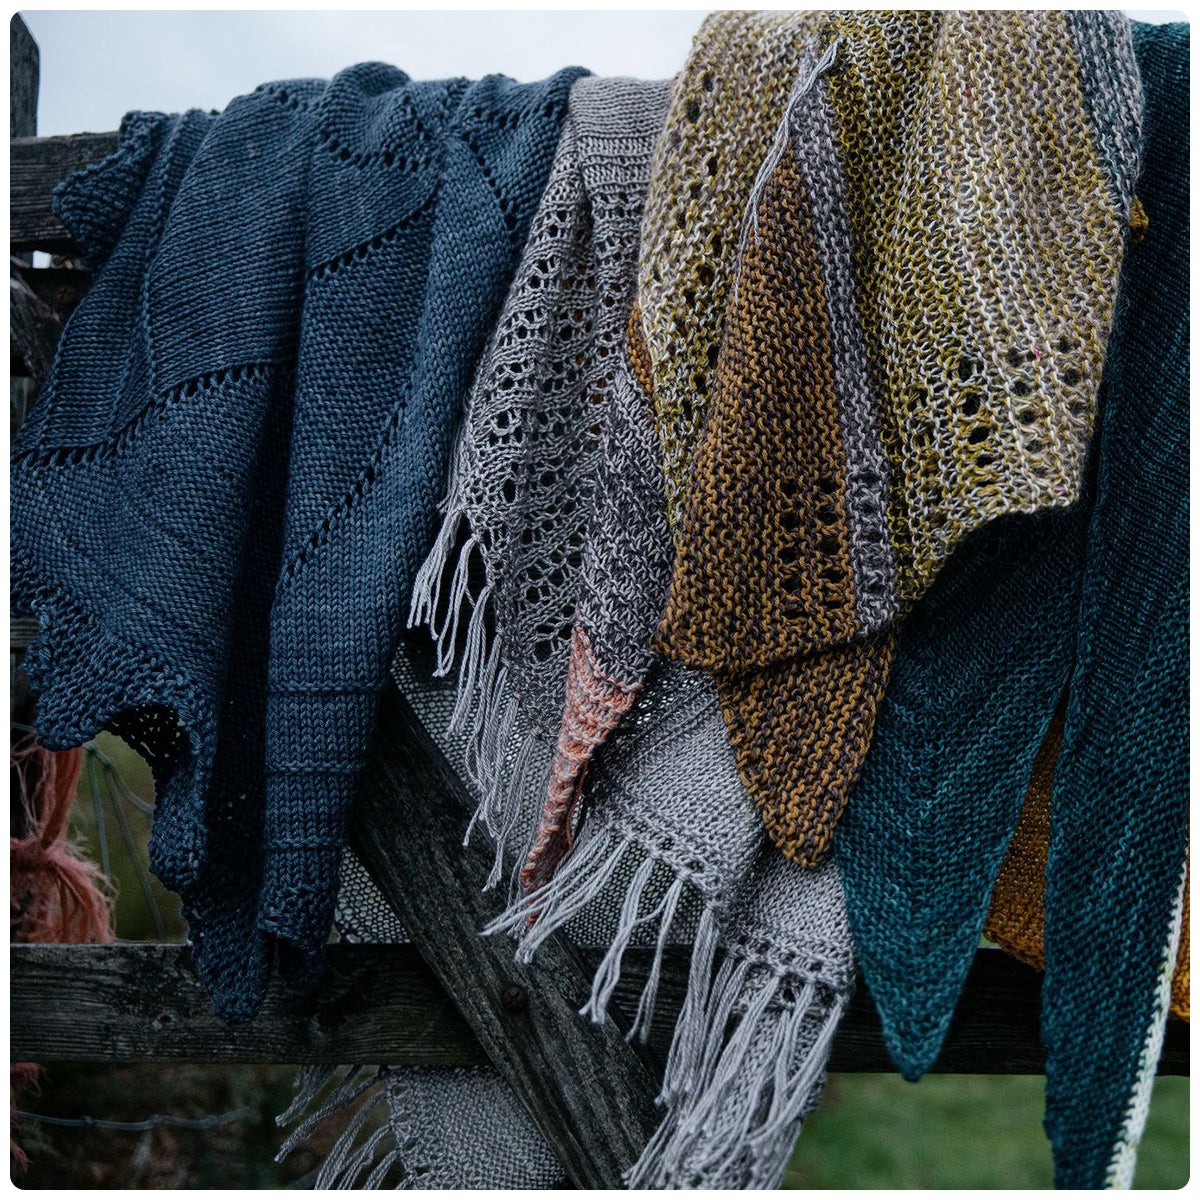 A Little Book of Moon-Inspired Shawls